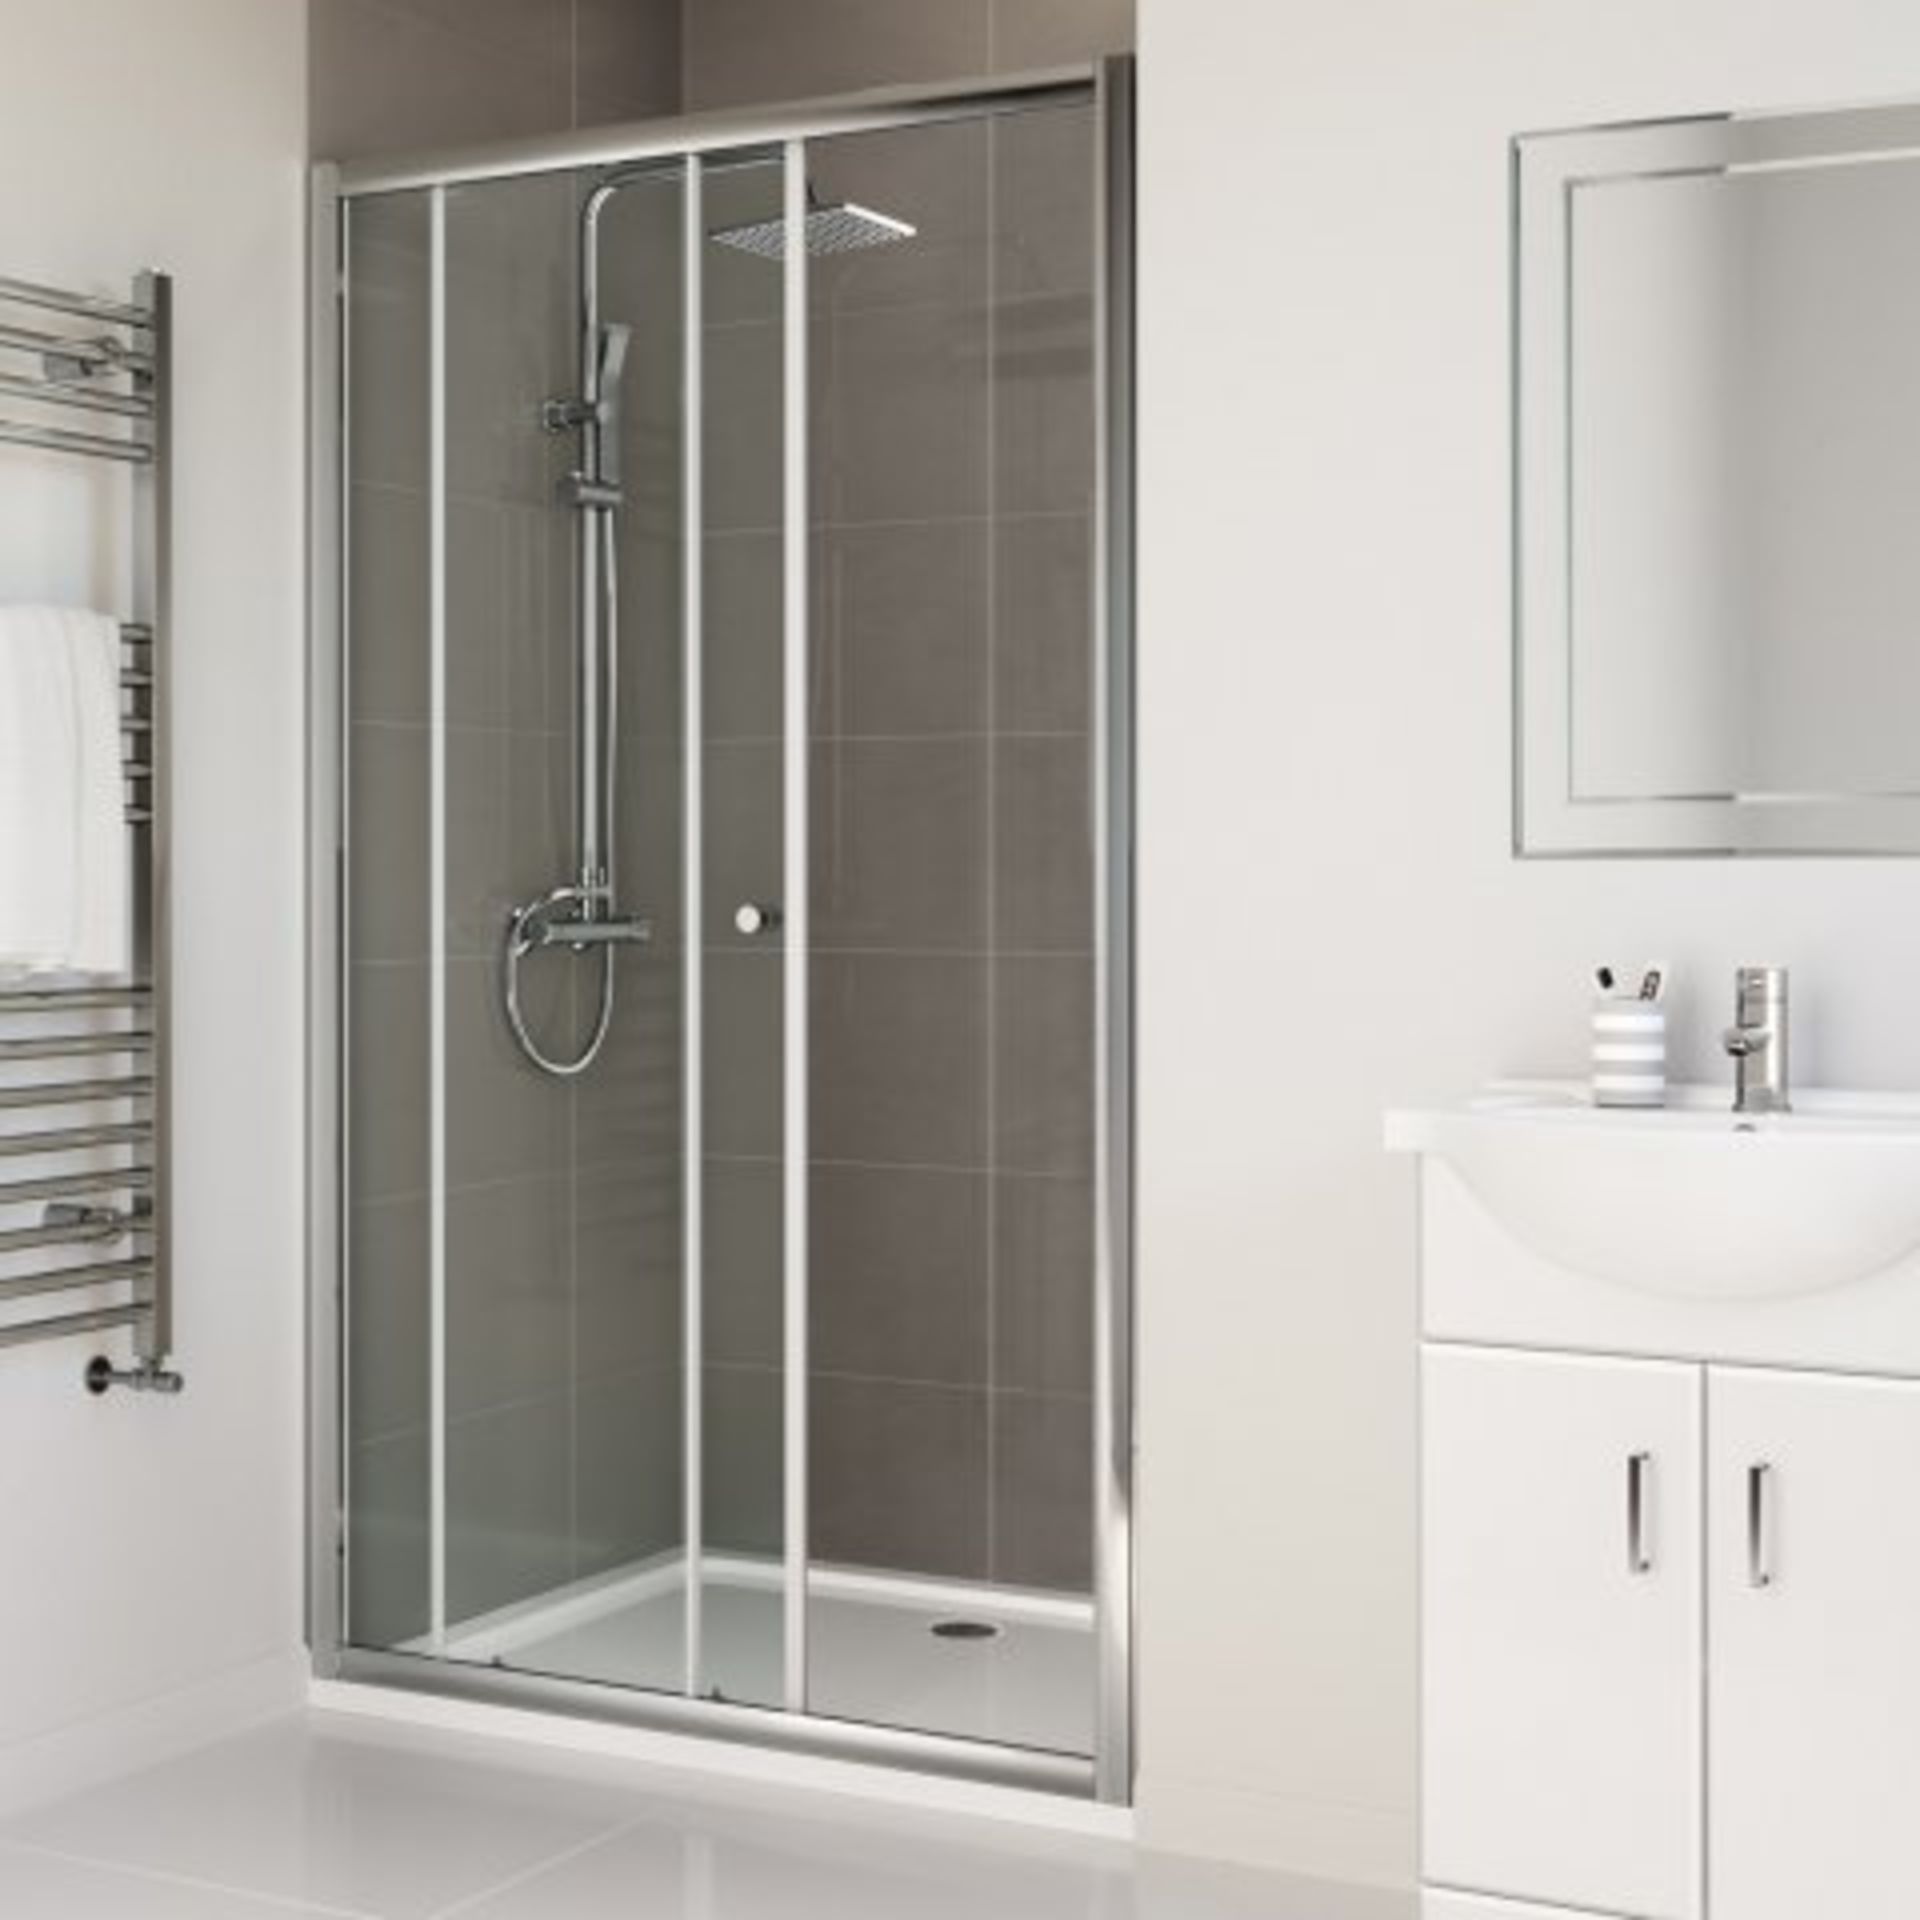 (N116) 1200mm - Elements Sliding Shower Door. RRP £299.99. Designed and crafted to improve the decor - Image 2 of 5